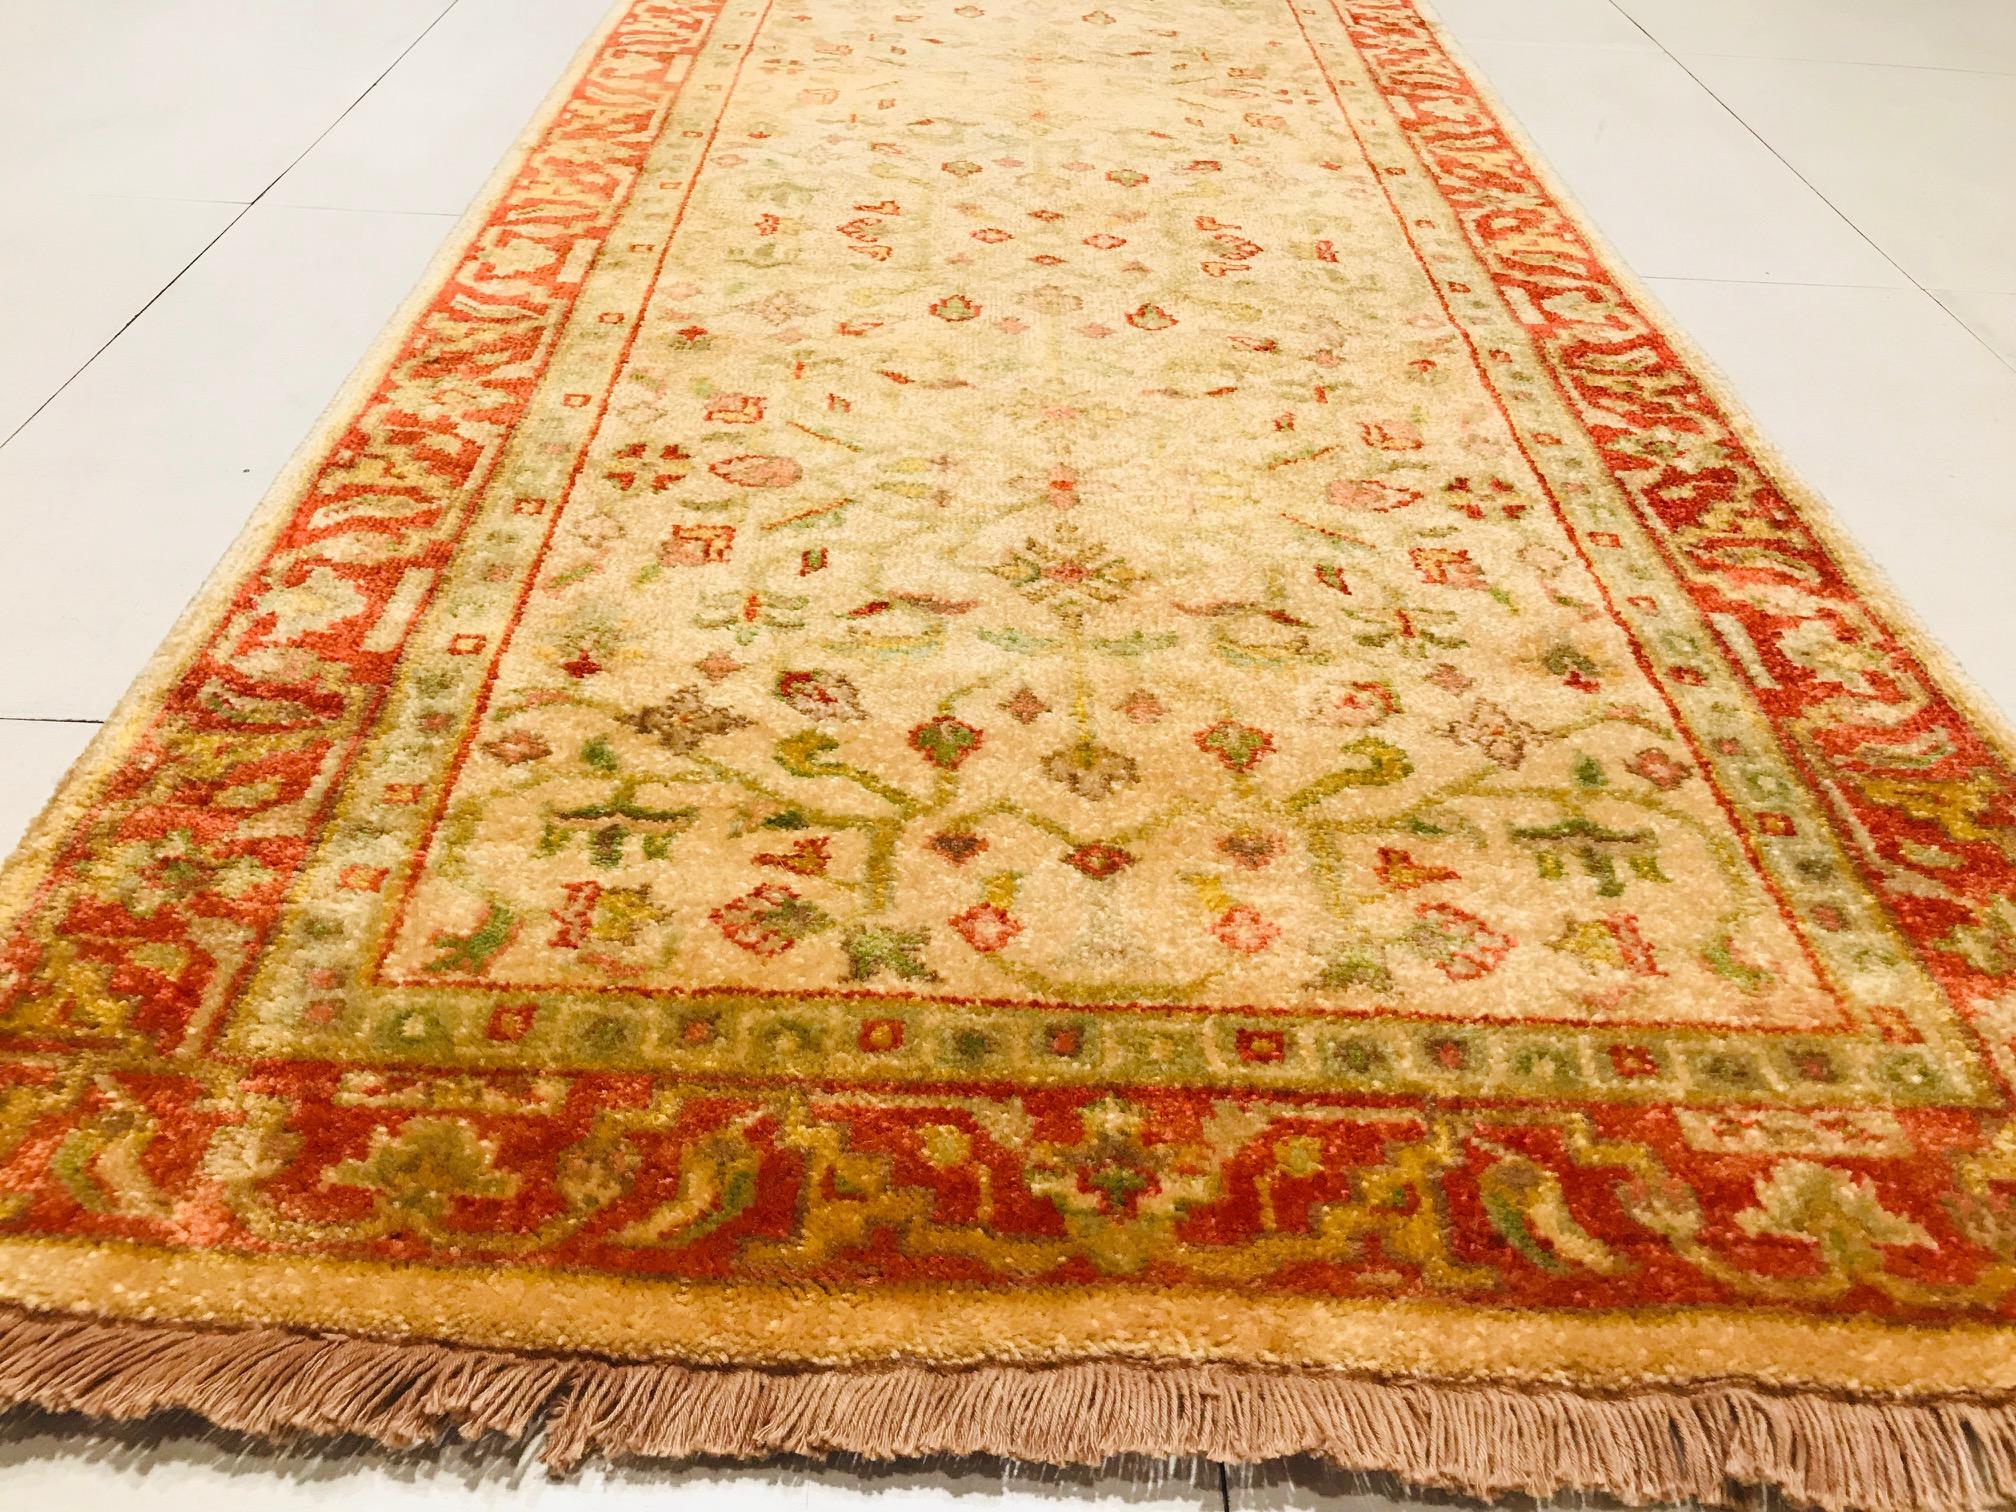 Late 20th Century Wool Hand Knotted Indian Runner Rug Red and Beige 1980s In Excellent Condition For Sale In Valencia, Spain